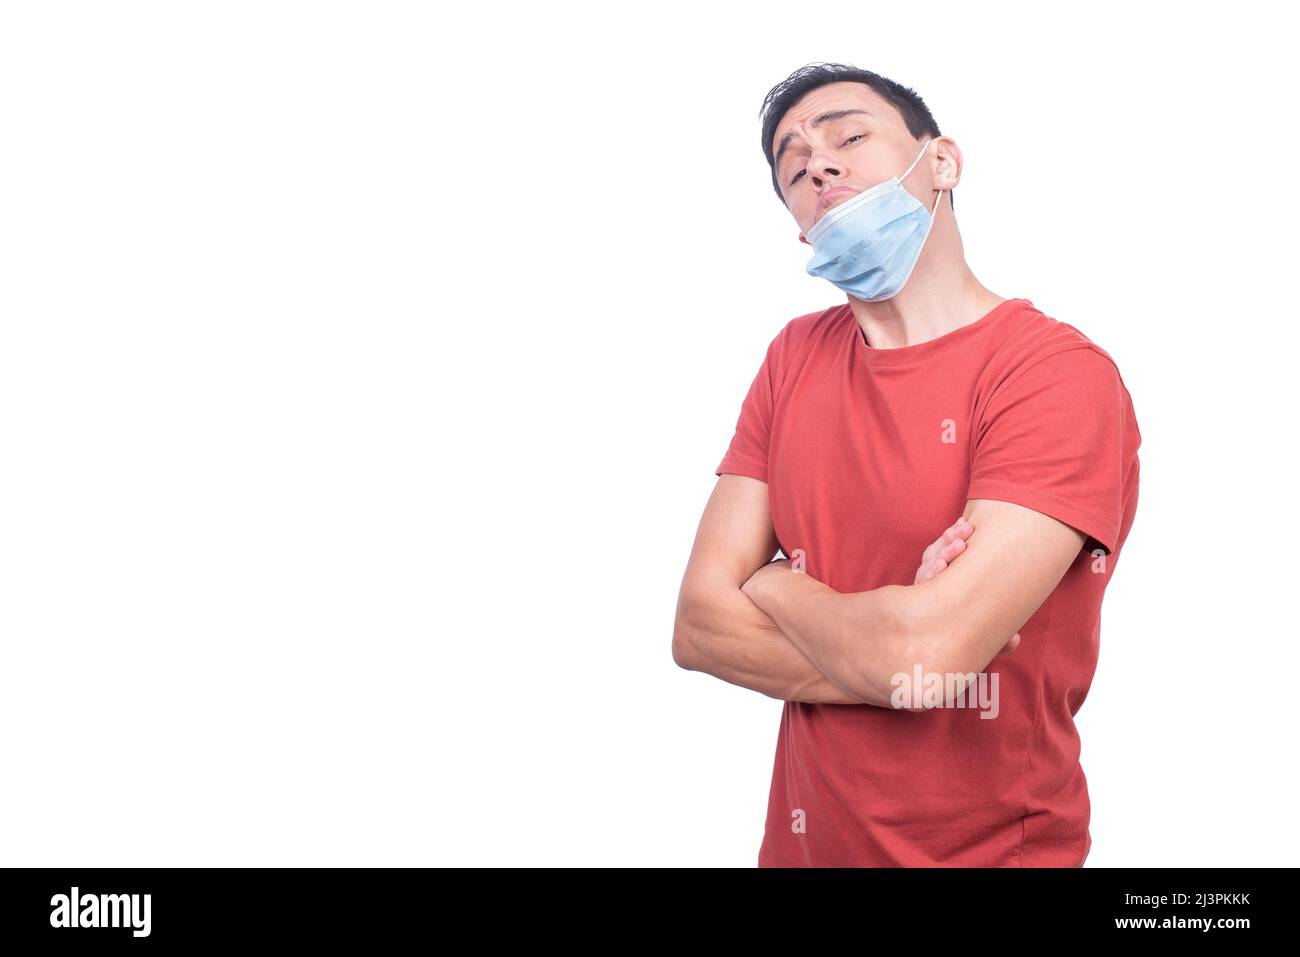 Irresponsible man with misplaced medical mask during COVID pandemic Stock Photo